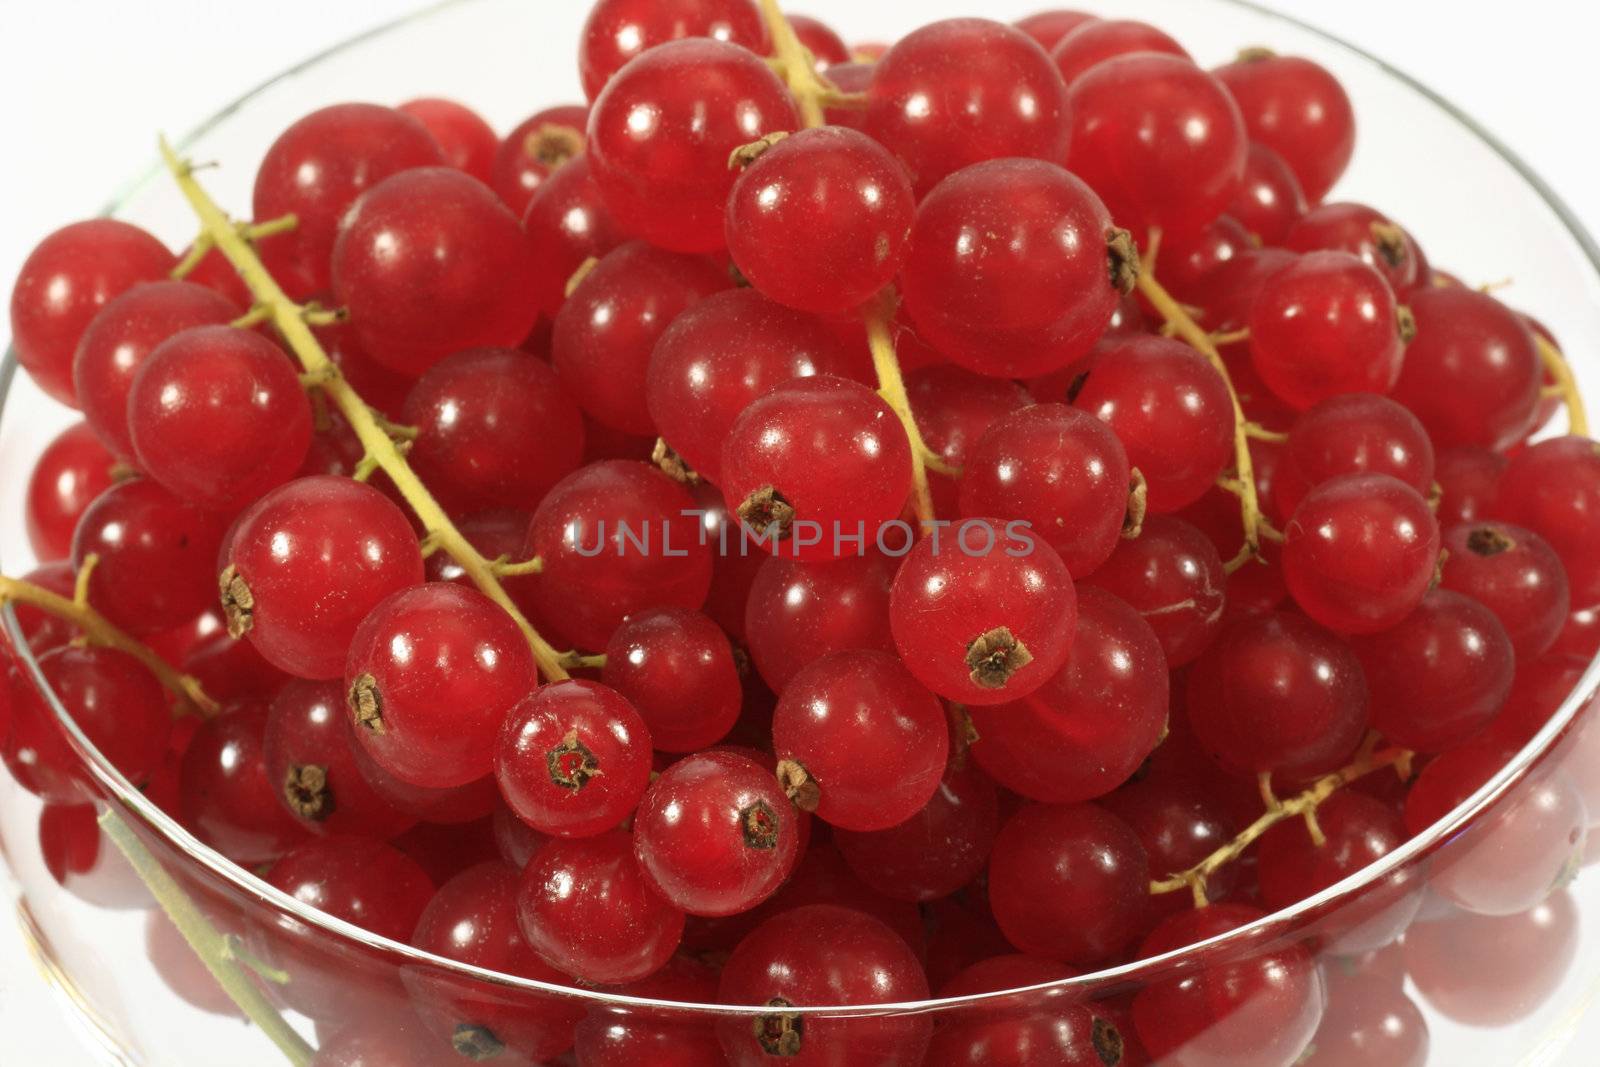 Fresh red currants in a glass over white background